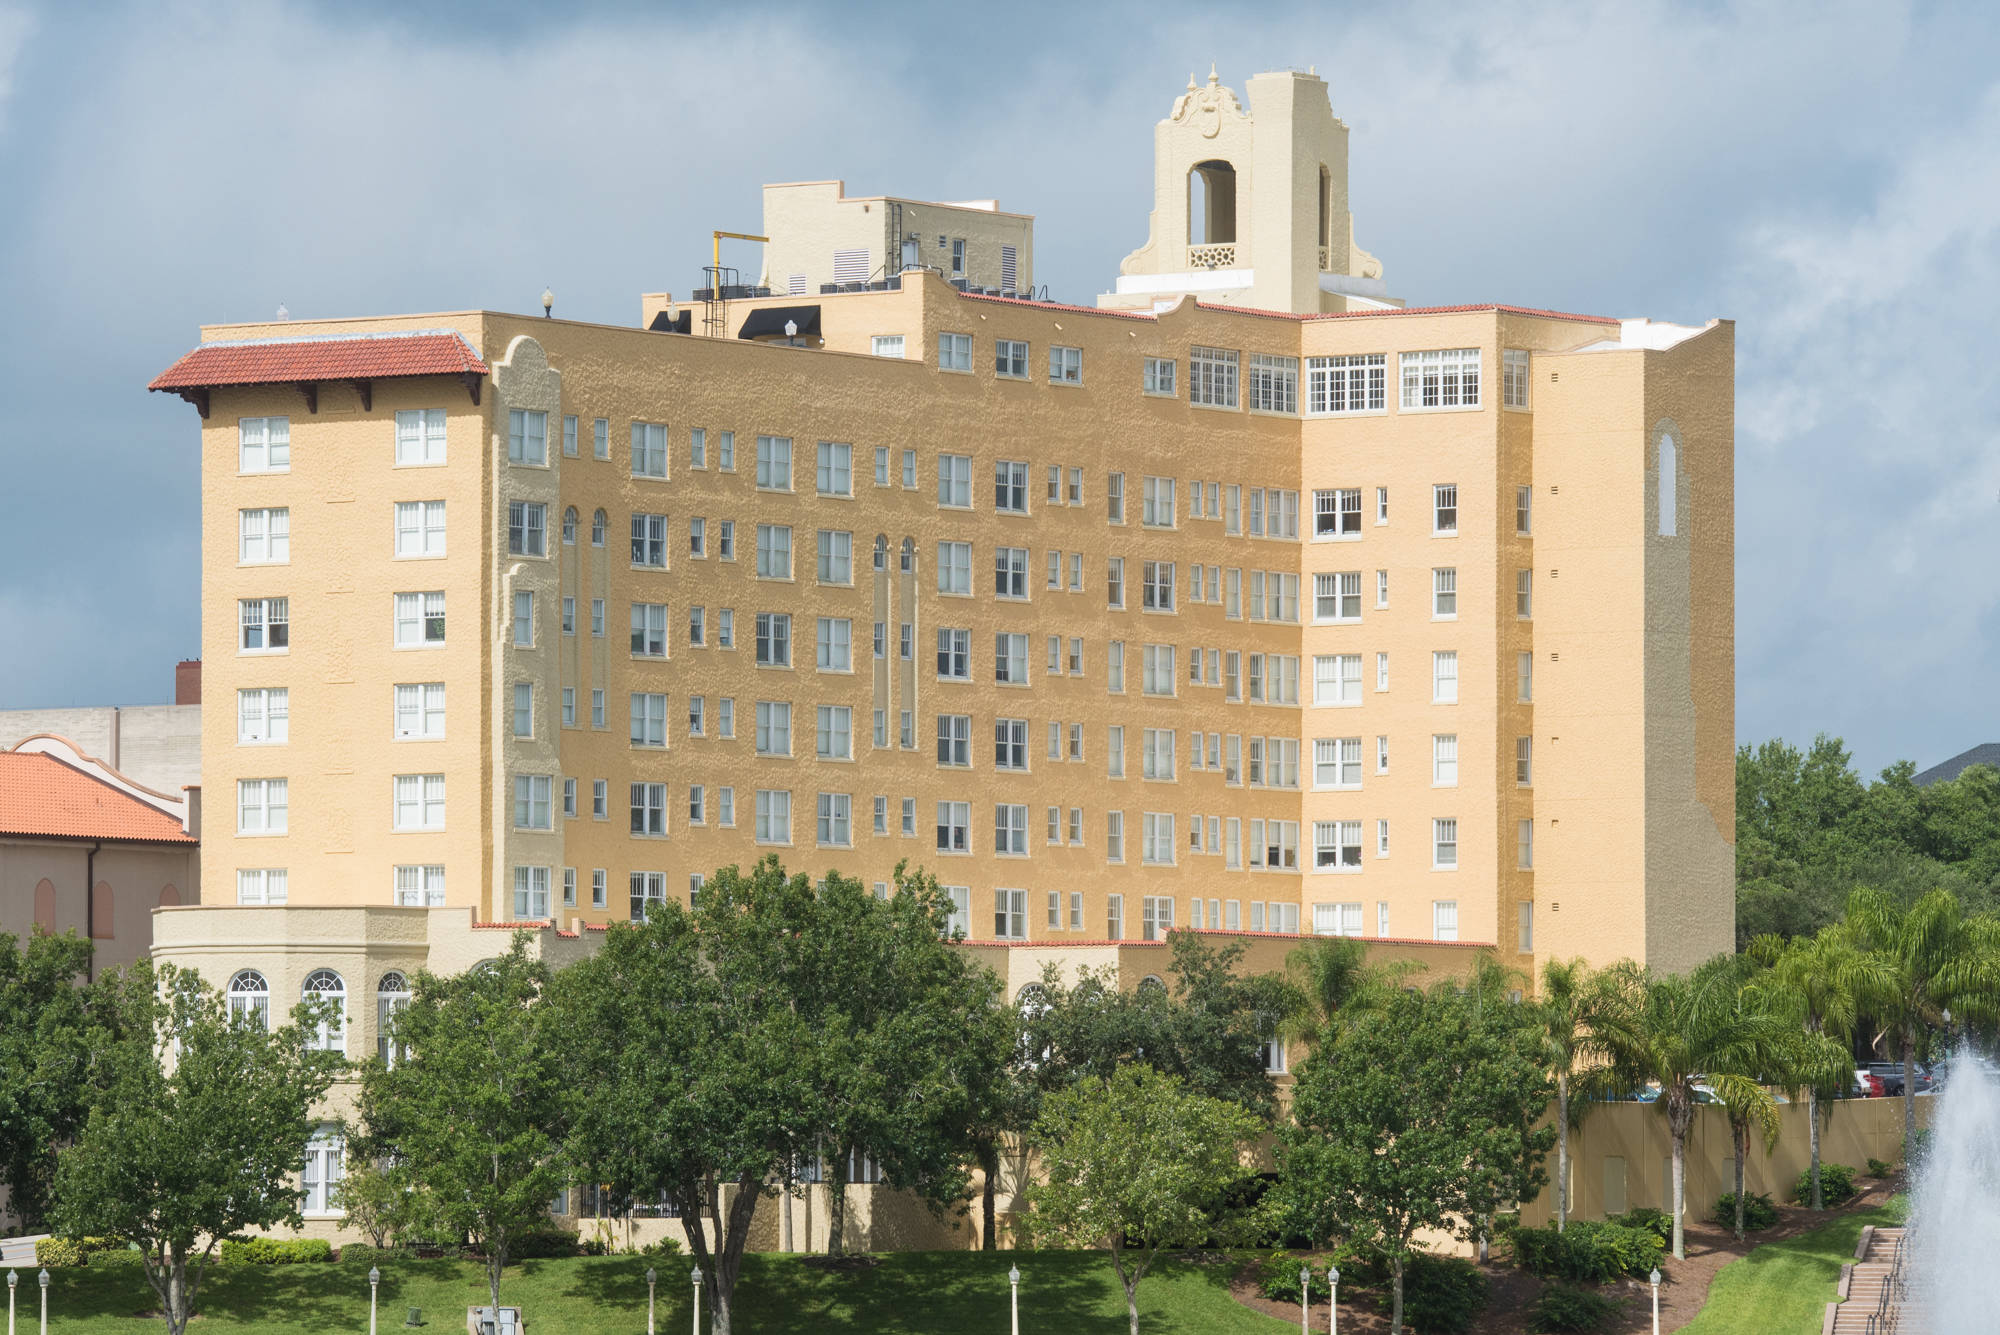 Lake Mirror Tower was originally built in 1926 as the New Florida Hotel. The eight-story structure was purchased by the City of Lakeland and renovated in 2004. It now has 76 apartments.